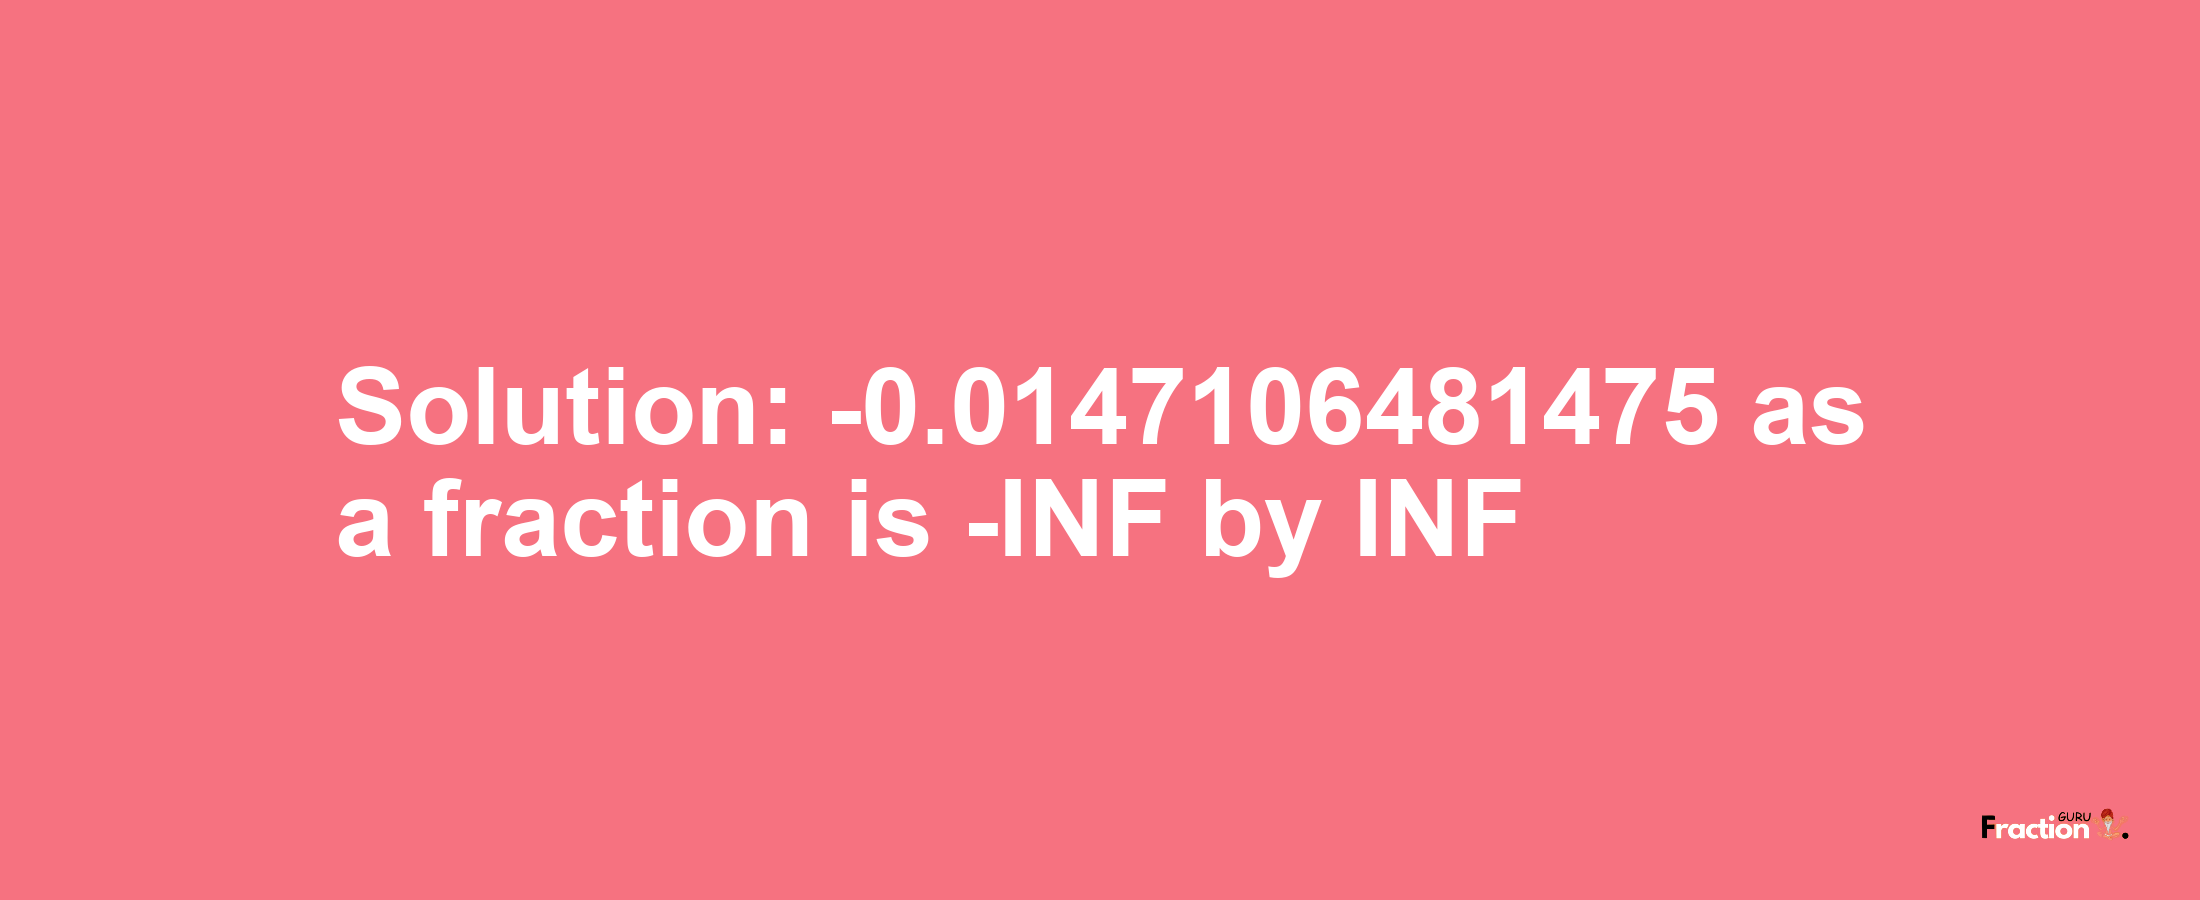 Solution:-0.0147106481475 as a fraction is -INF/INF